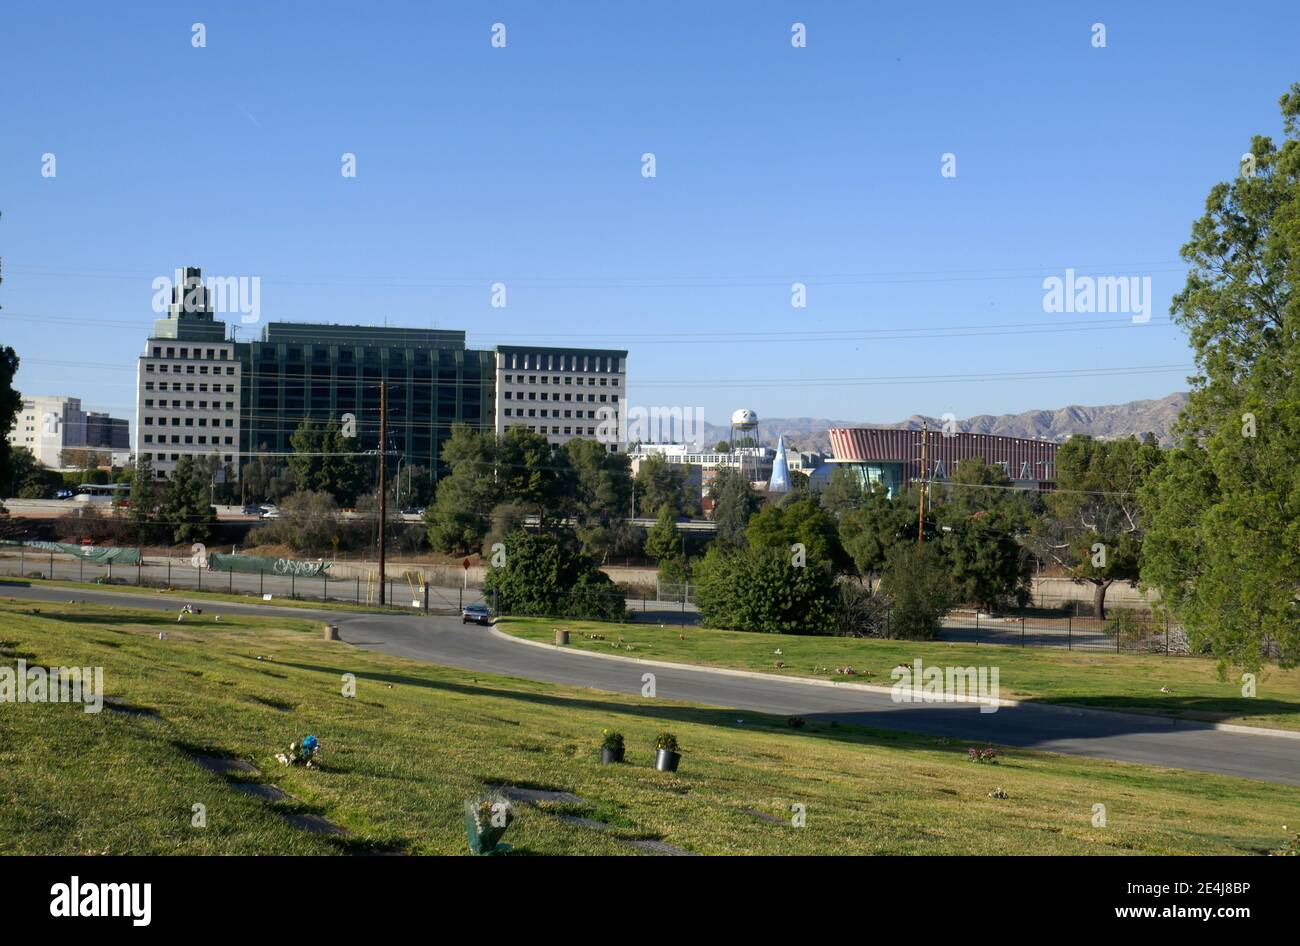 Los Angeles, California, USA 21st January 2021 A general view of atmosphere of Disney Animation Studios view from animator Tex Avery's Grave at Forest Lawn Memorial Park Hollywood Hills on January 21, 2021 in Los Angeles, California, USA. Photo by Barry King/Alamy Stock Photo Stock Photo